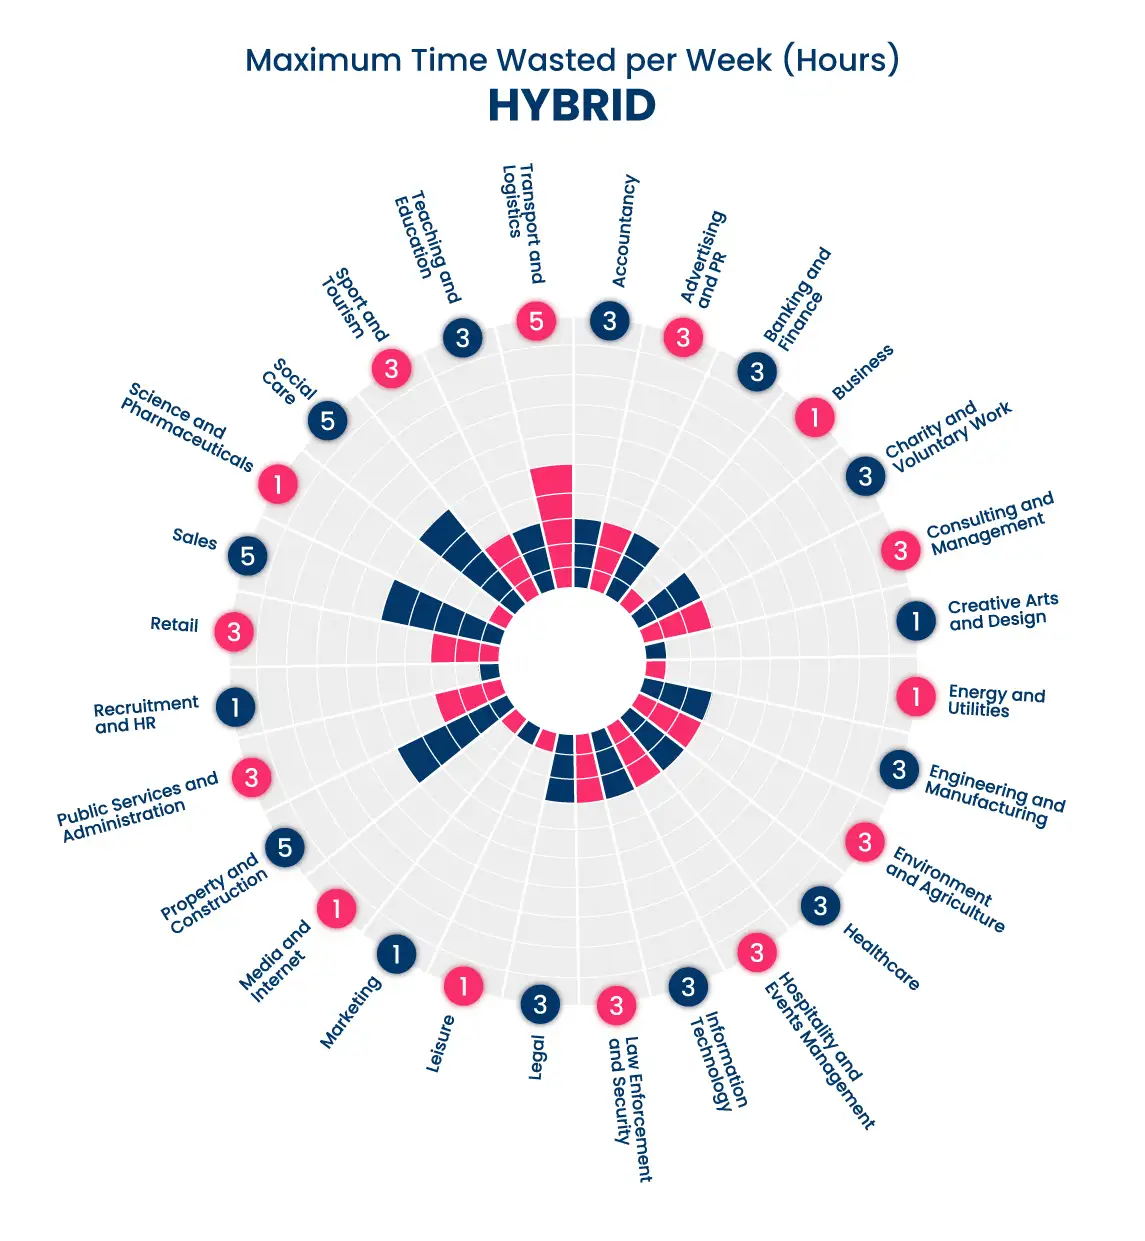 An asset showing how much time is wasted in hybrid roles